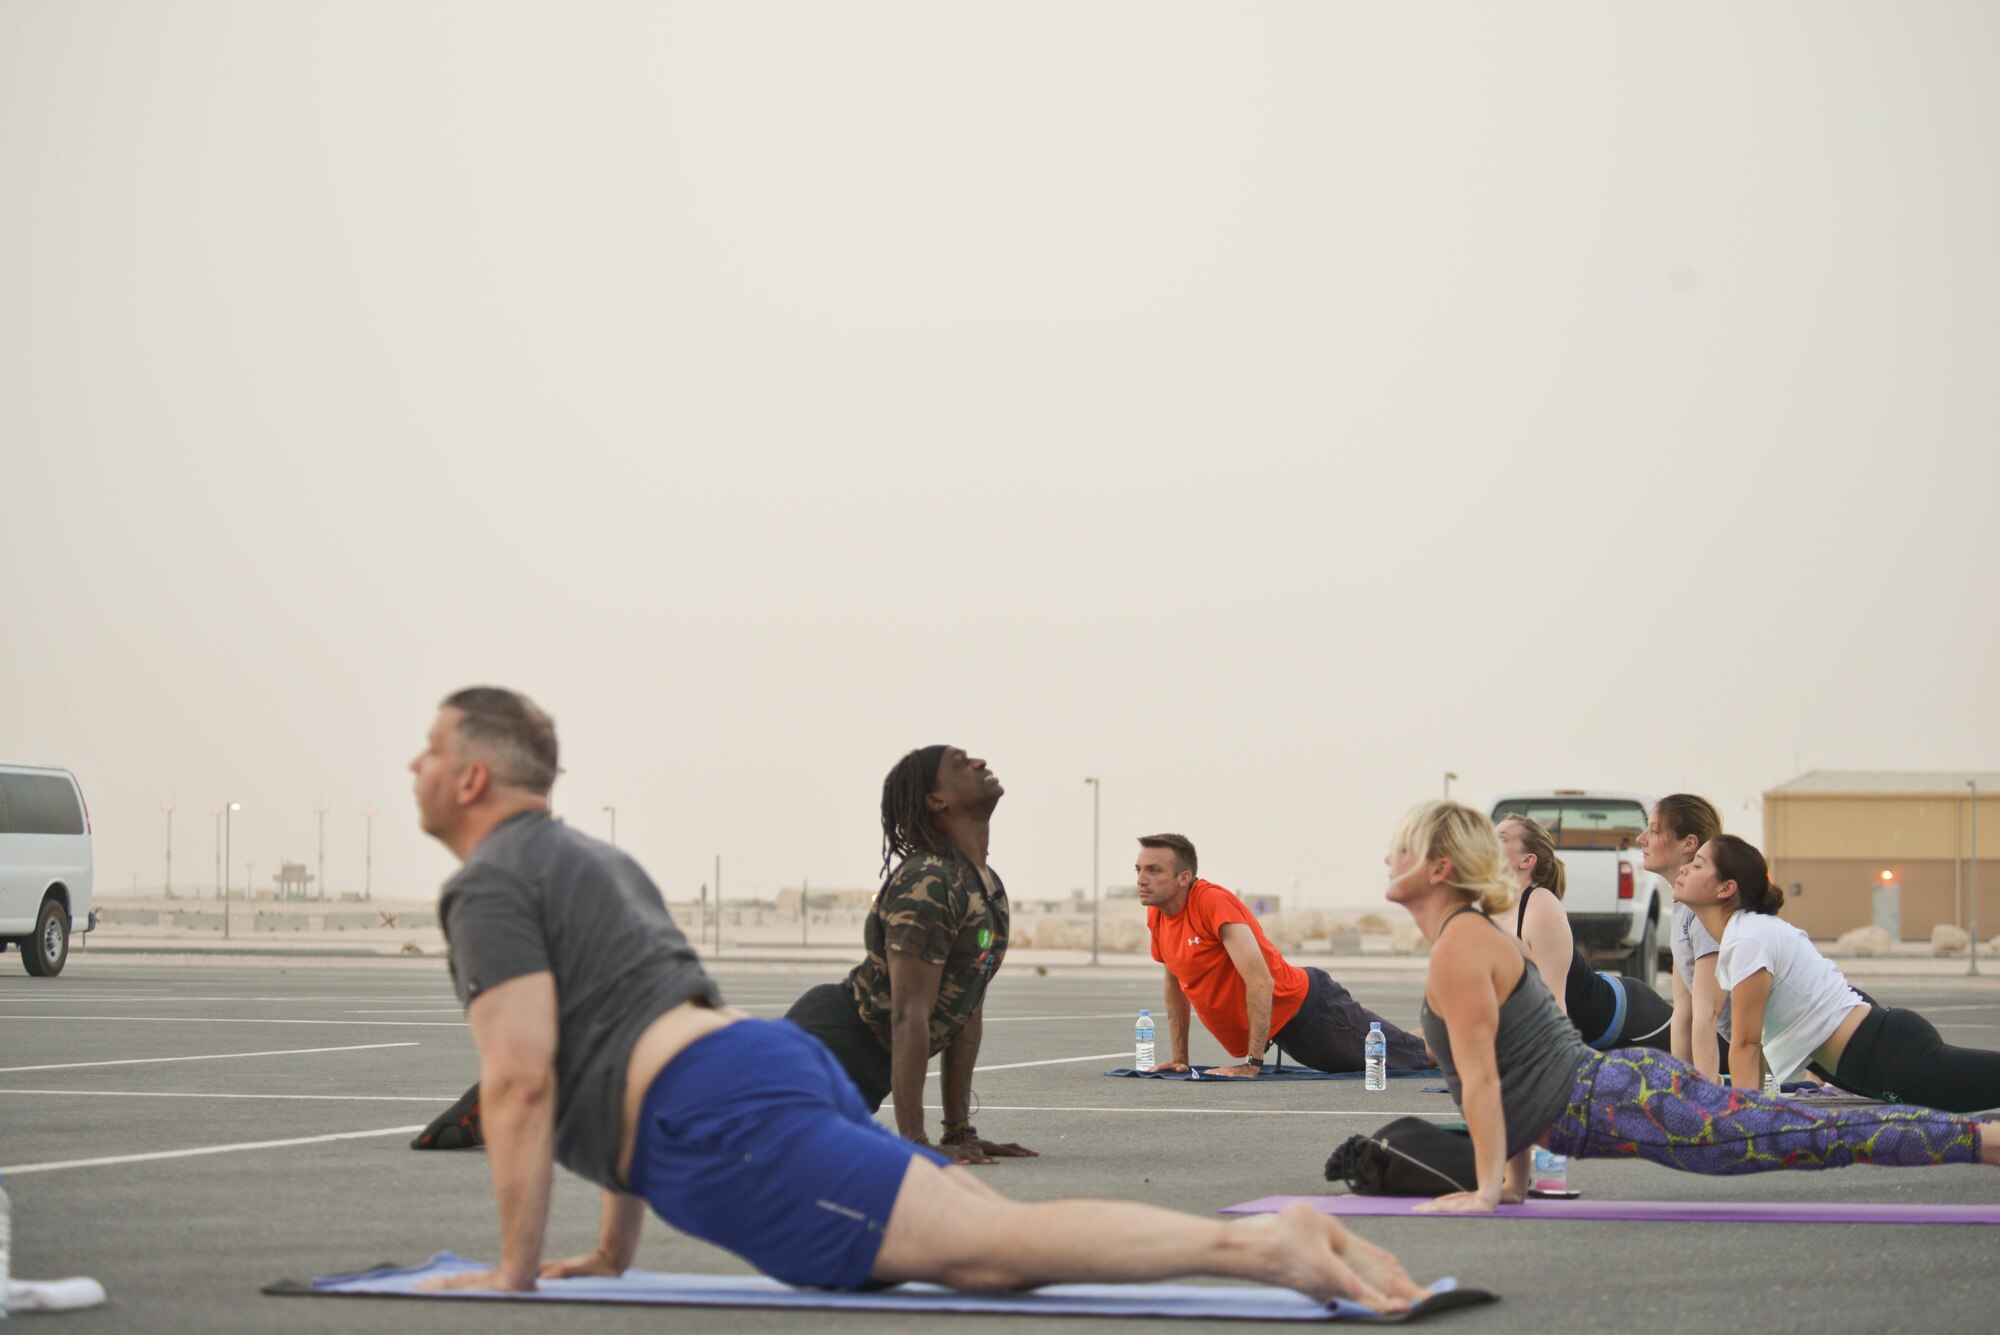 Tracy English, 609th Air and Space Operations Center historian, leads deployed members into the cobra position during the largest Yoga session to take place in Qatar history July 11, 2015 Al Udeid Air Base, Qatar. Tracy English and a few of the other yogis deployed to Al Udeid put together a power yoga routine and introduced it to the base during the largest yoga session in Qatar to date. (U.S. Air Force photo/Staff Sgt. Alexandre Montes)  